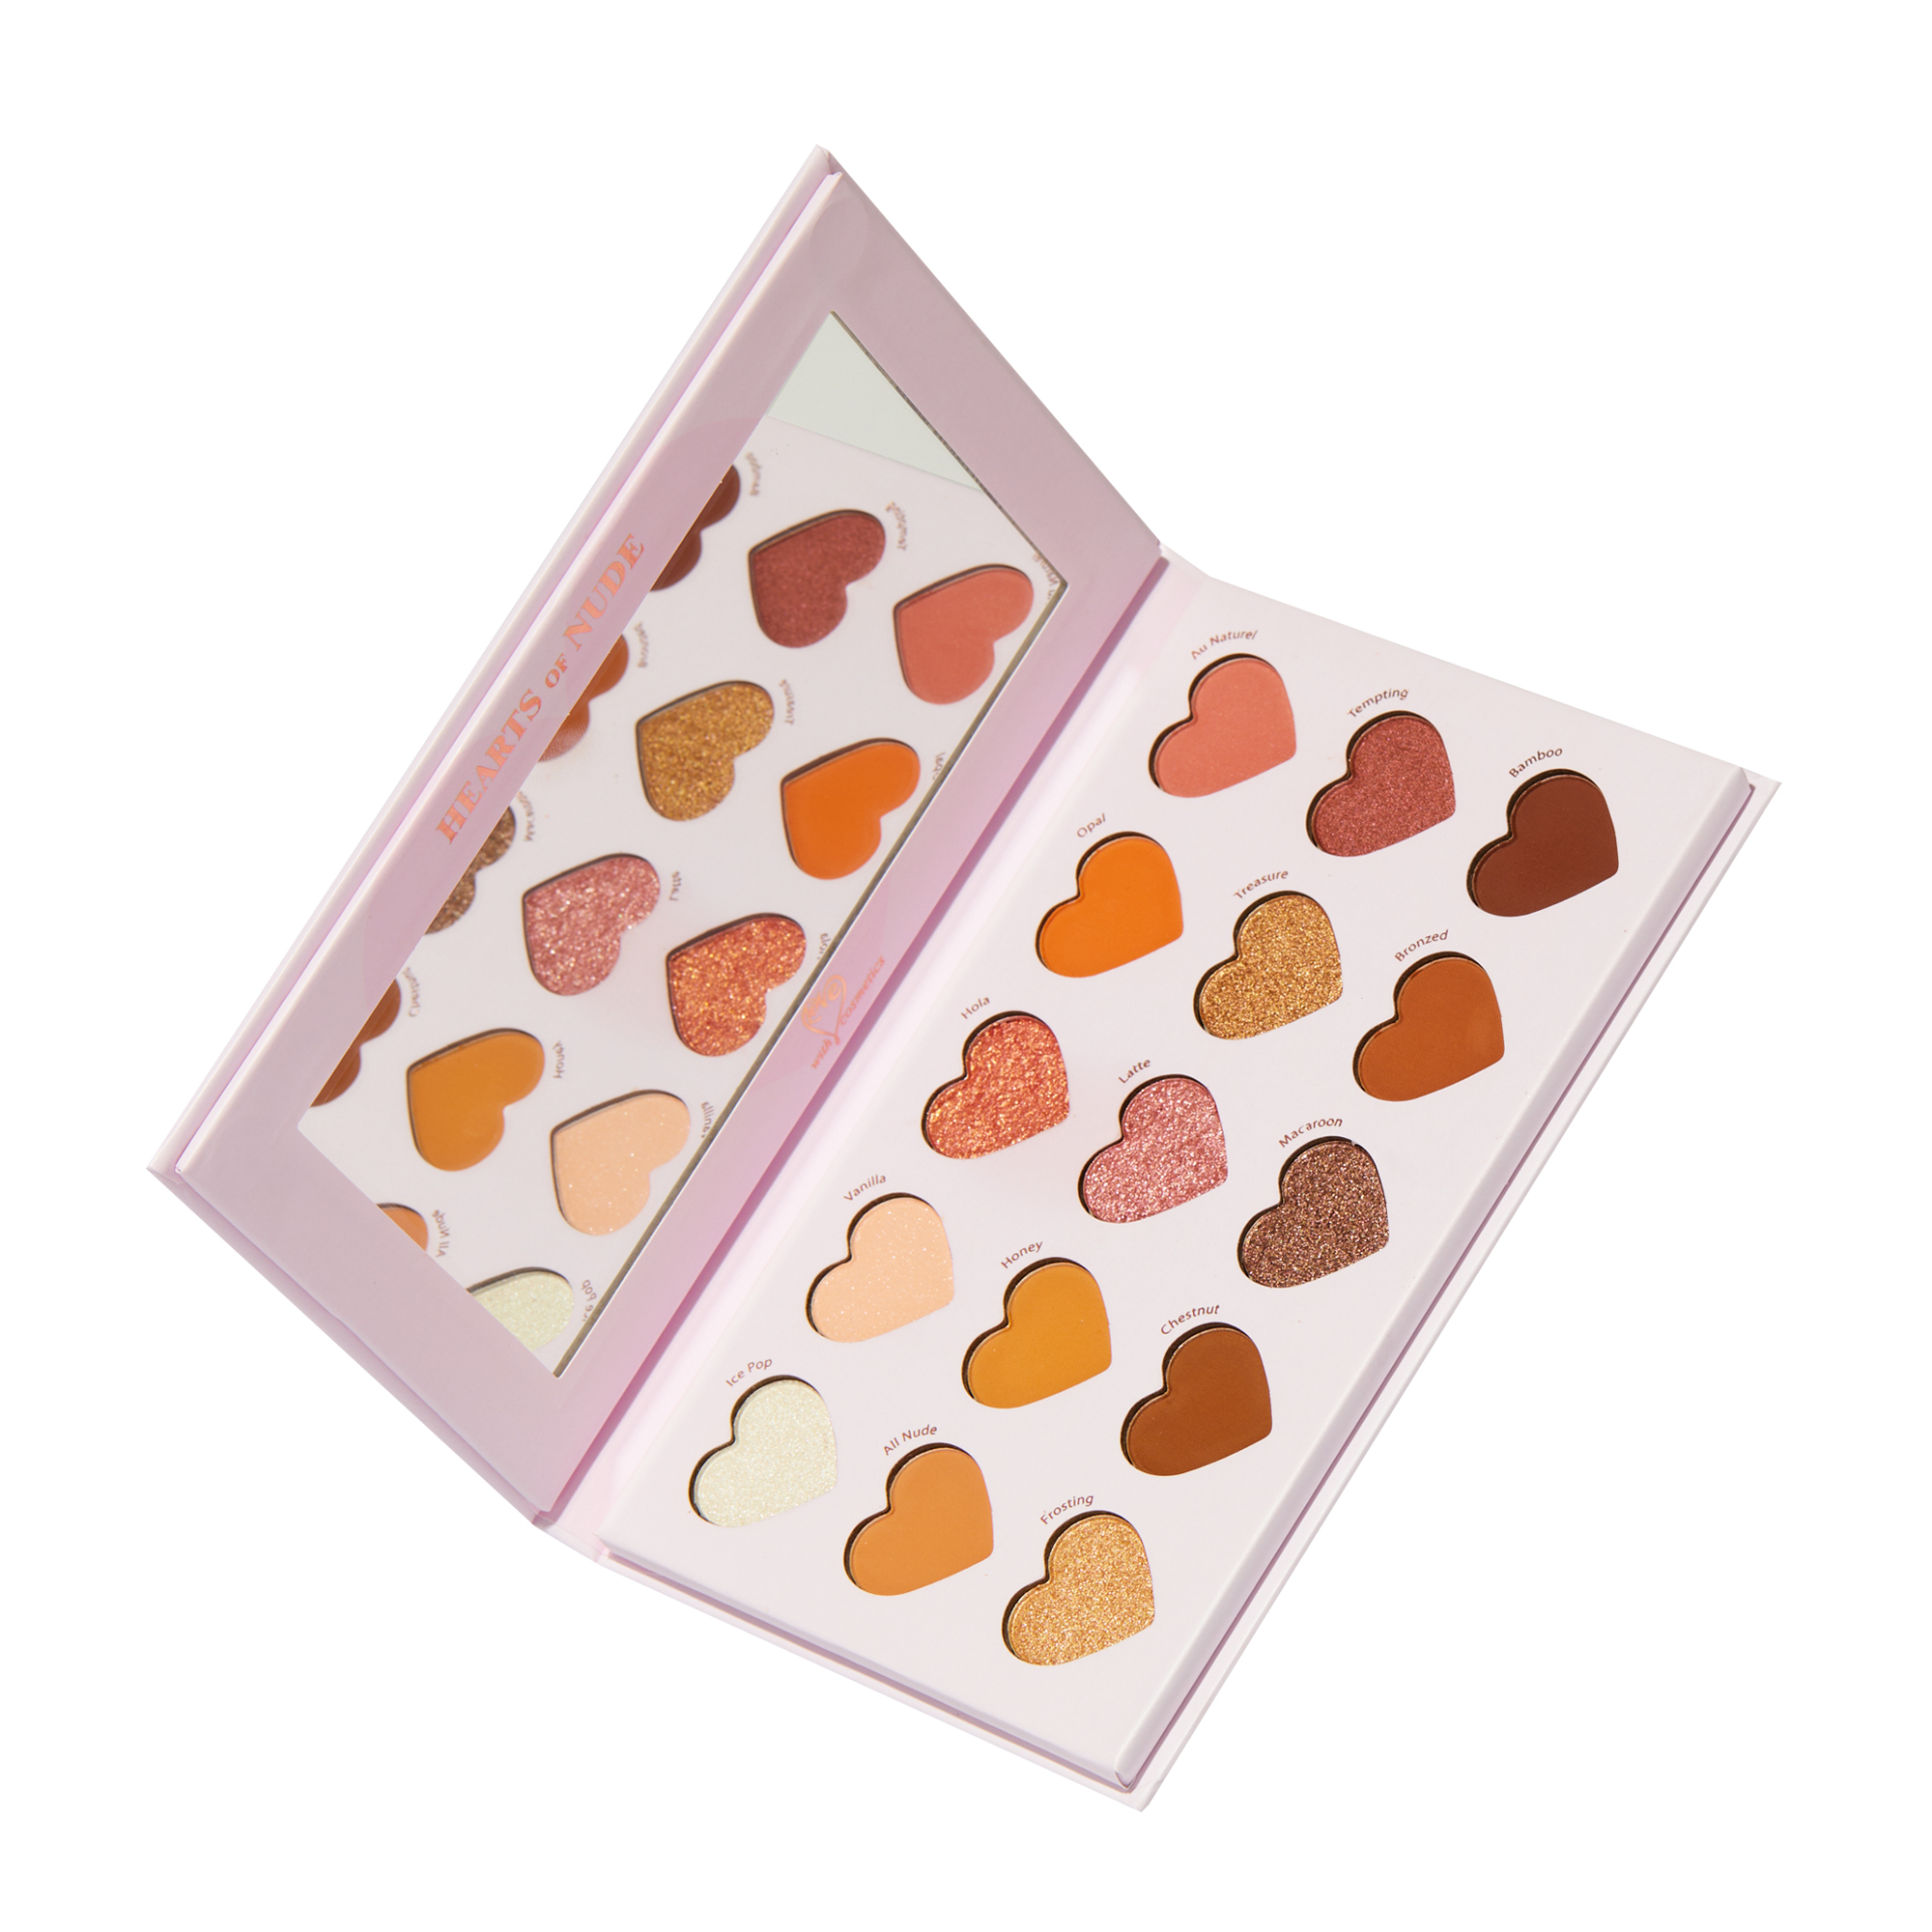 with love cosmetics hearts of nude palette